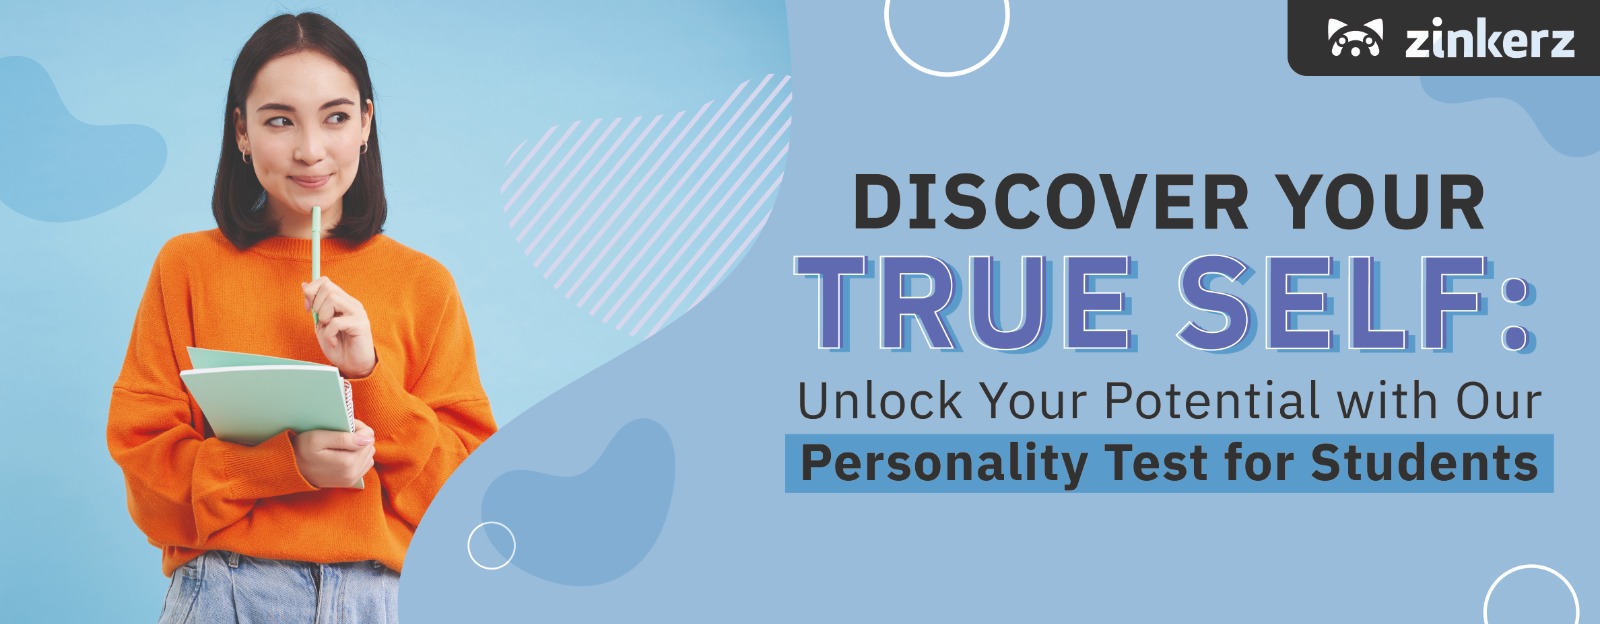 Discover Your True Self: Unlock Your Potential with Our Personality Test for Students